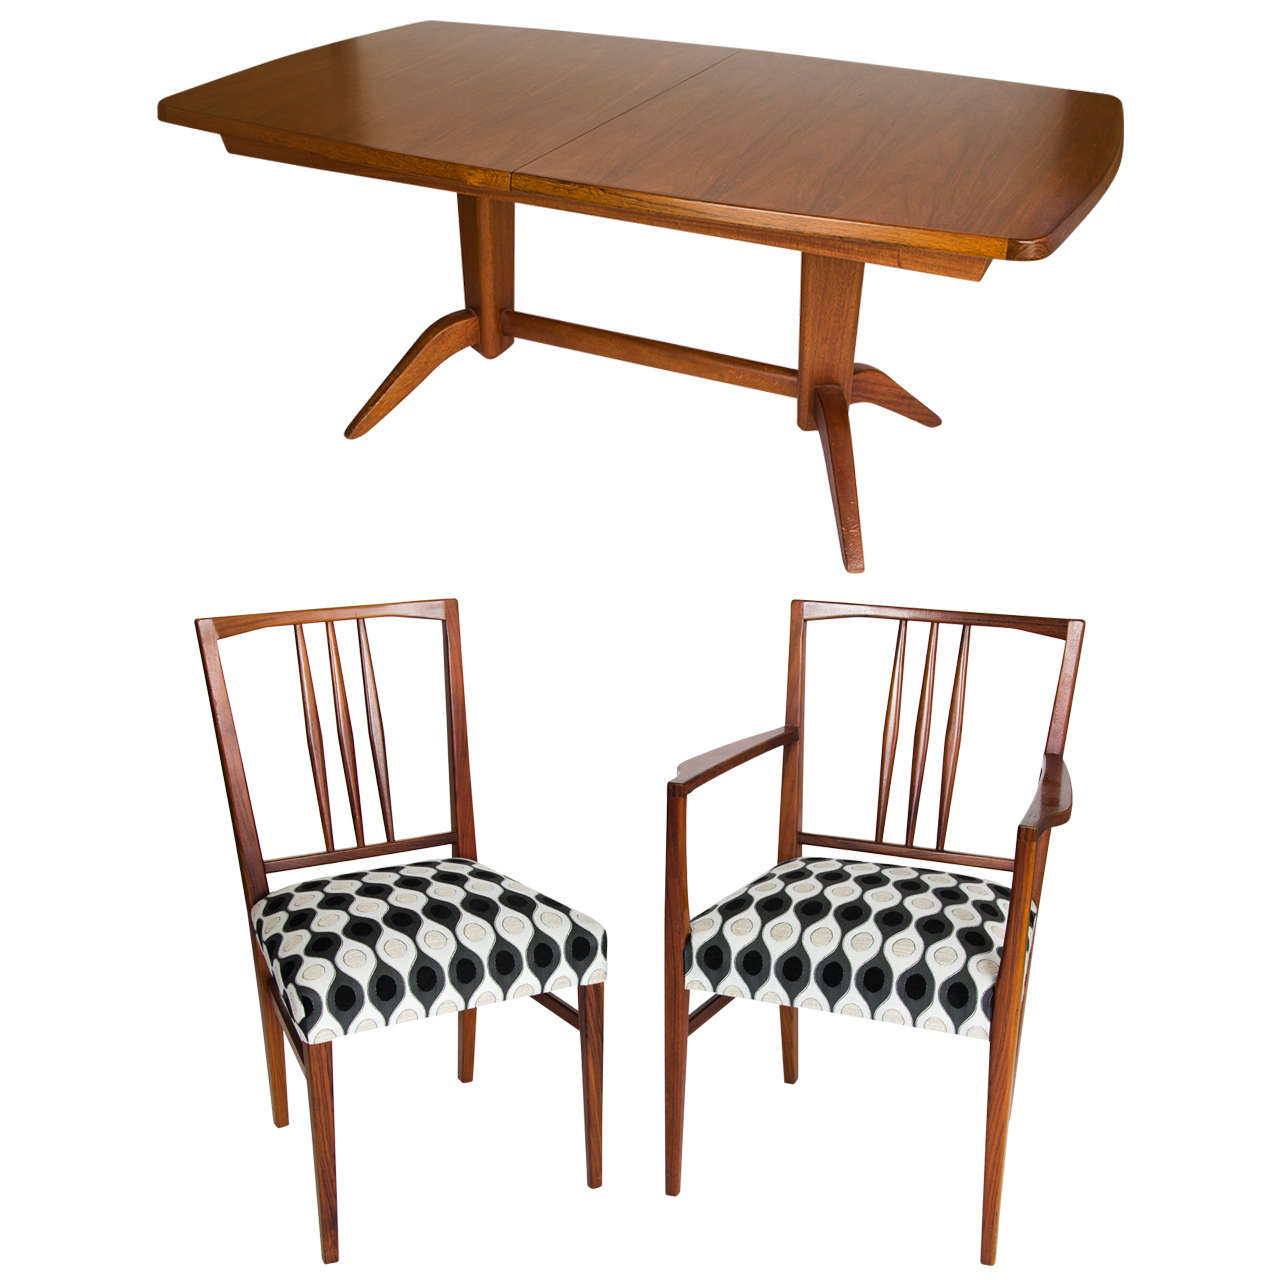 Gordon Russell Table and Chairs For Sale